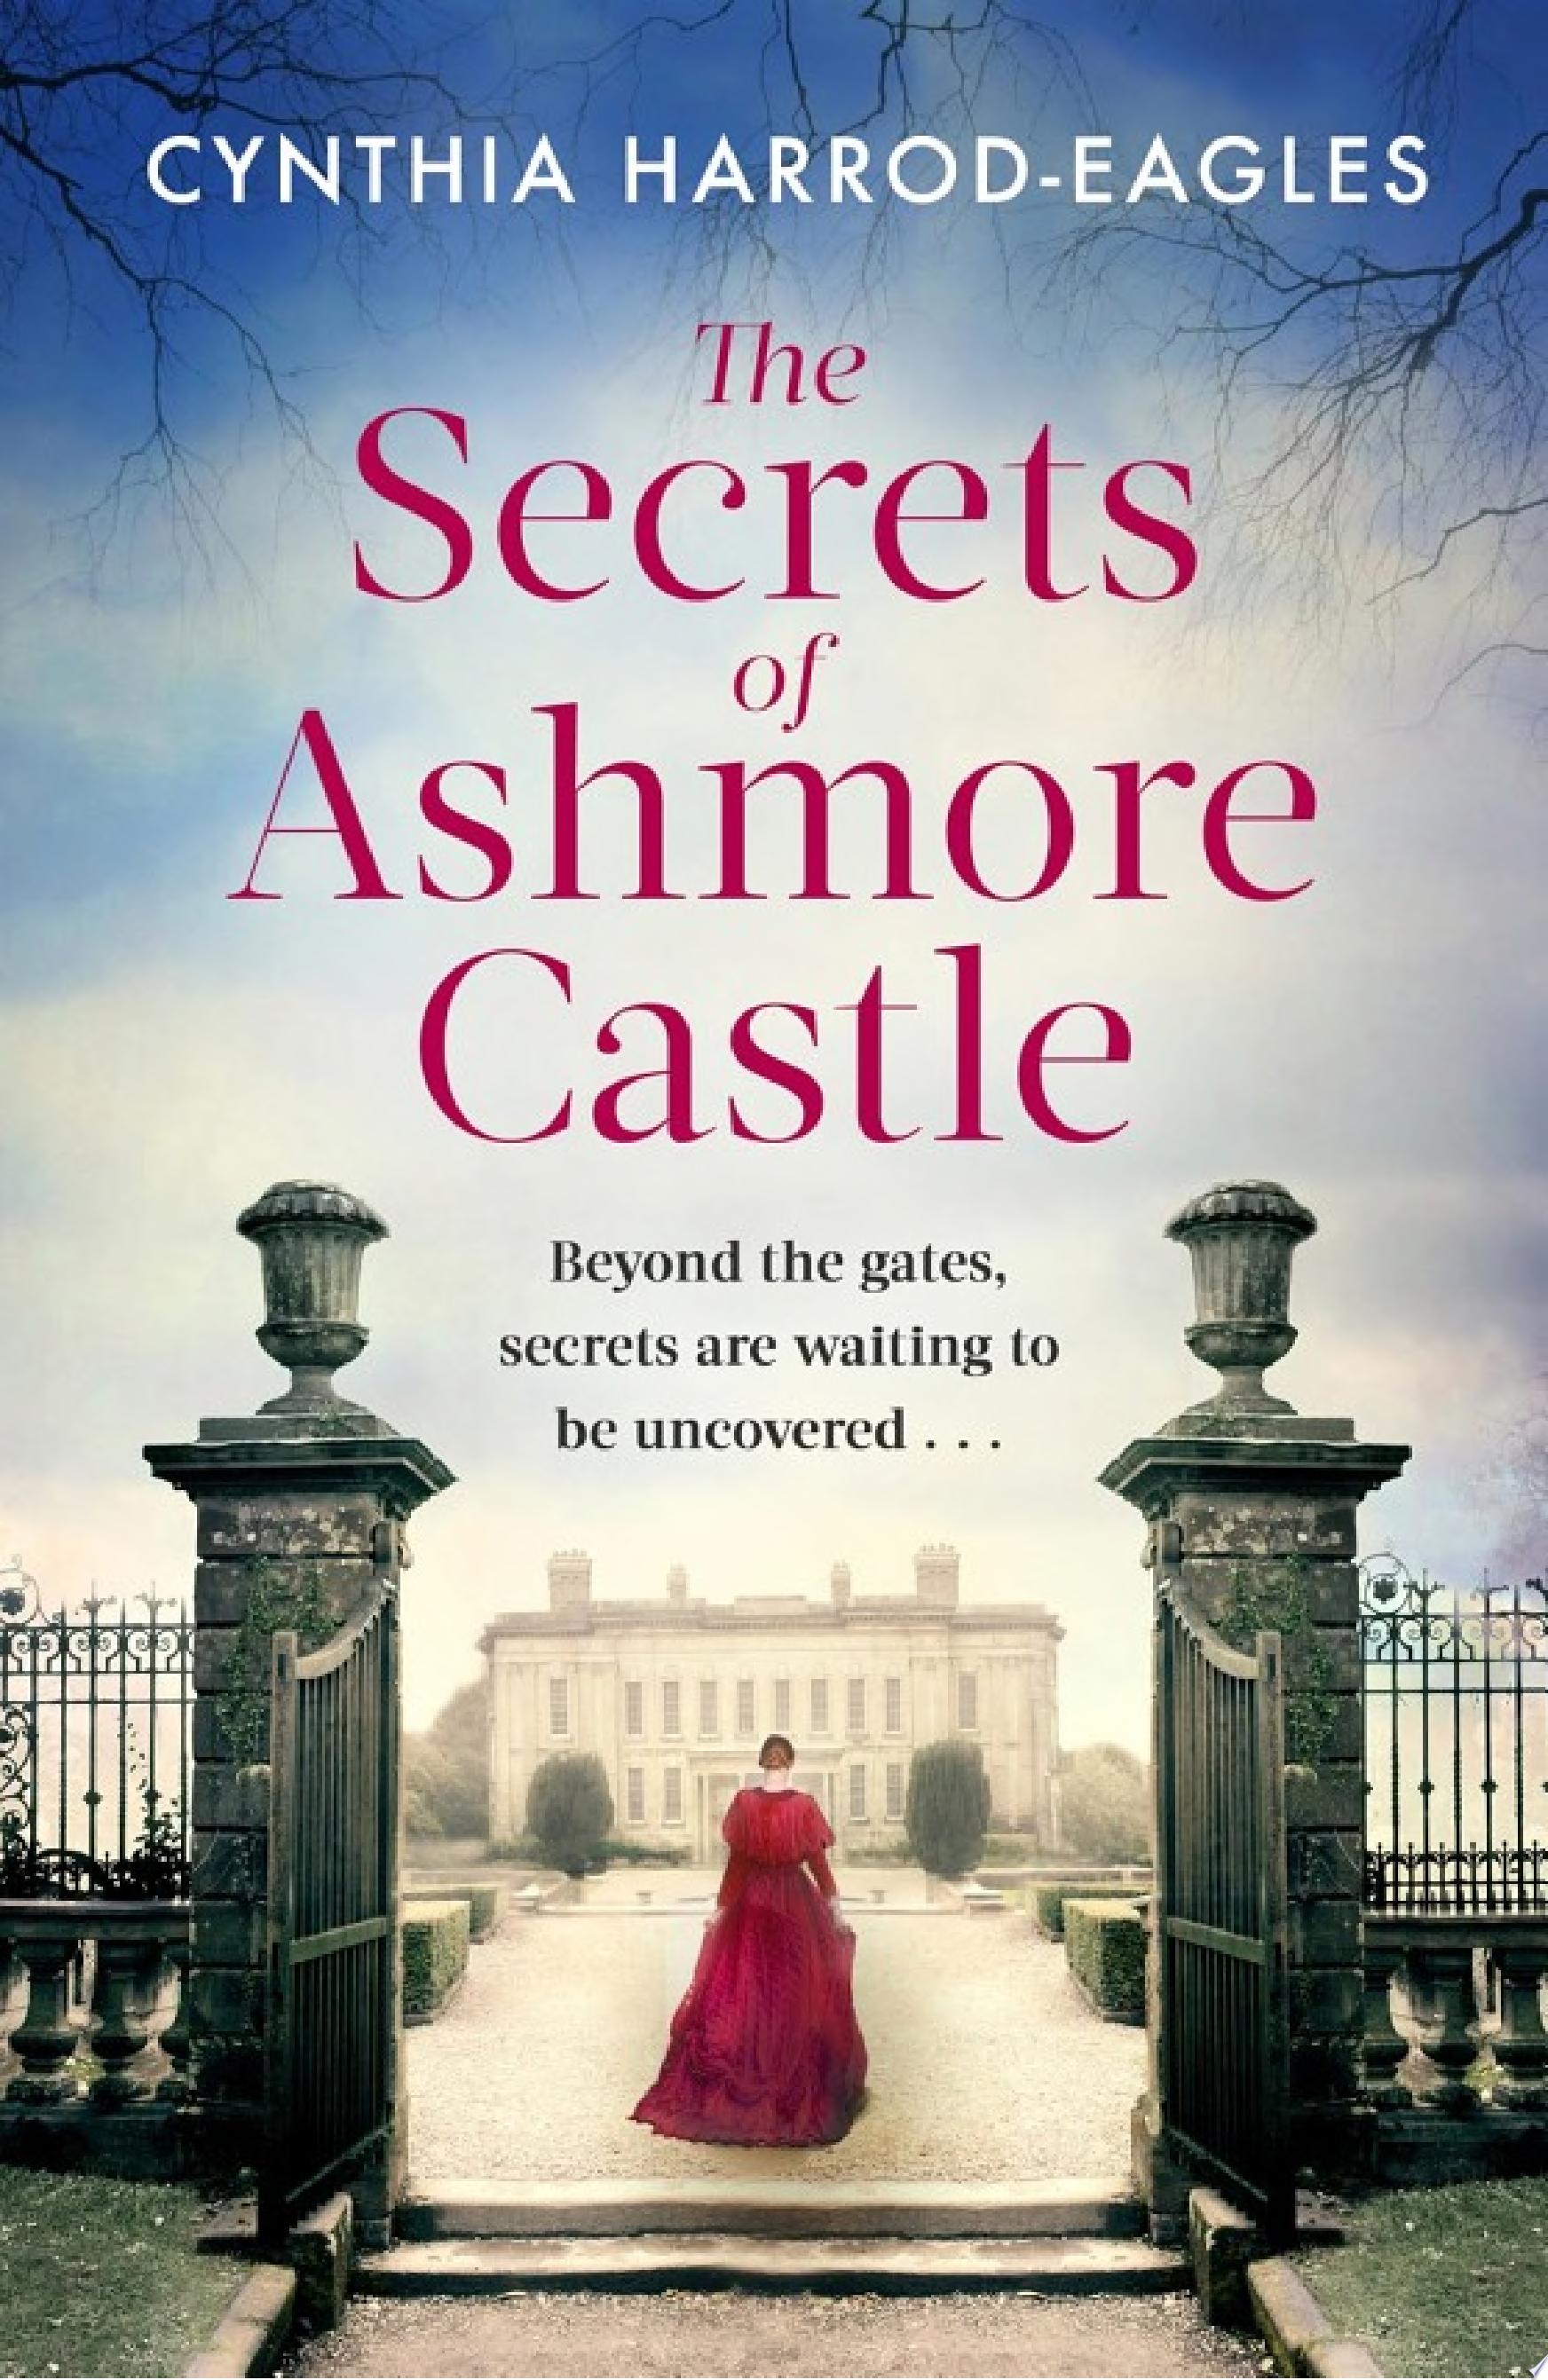 Image for "The Secrets of Ashmore Castle"